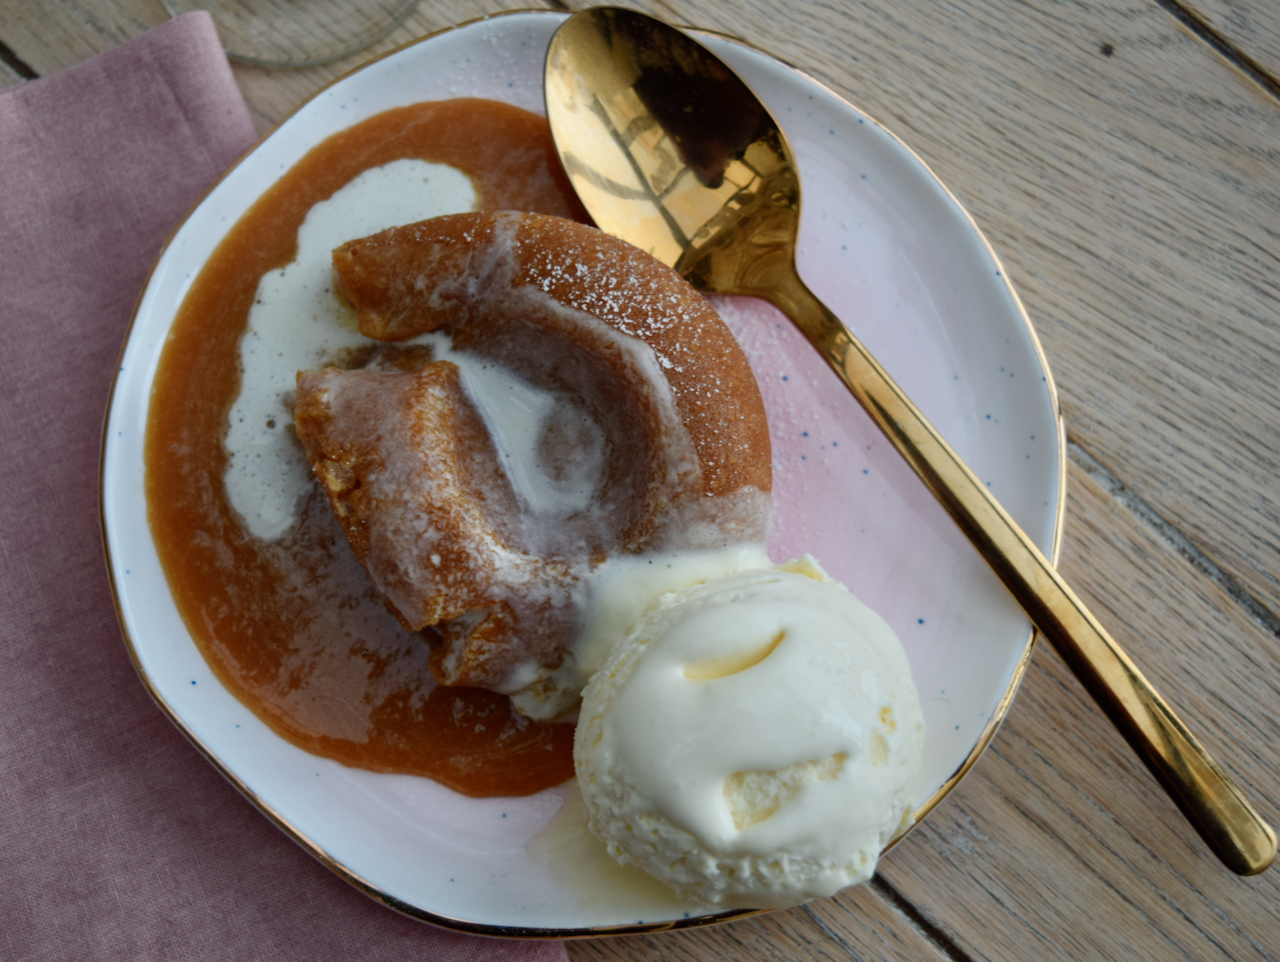 Caramel Lava Puddings recipe from Lucy Loves Food Blog